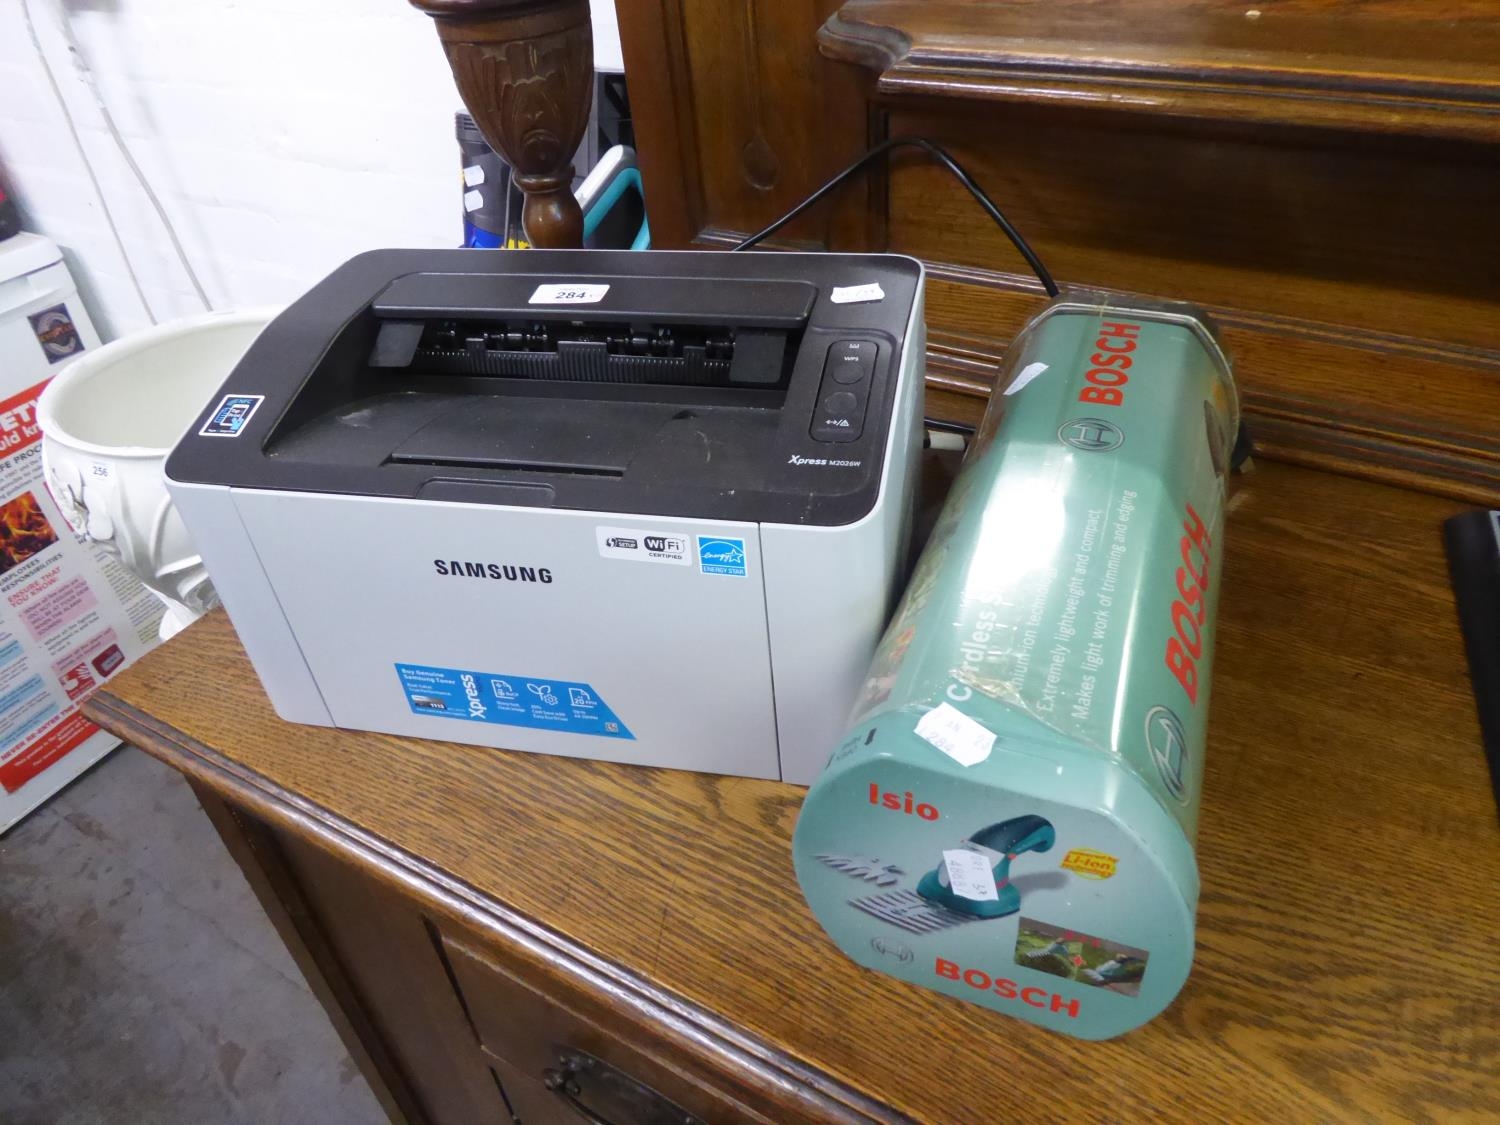 SAMSUNG SMALL PRINTER AND A BOSCH CORDLESS SHAPE AND EDGE TRIMMER (2)